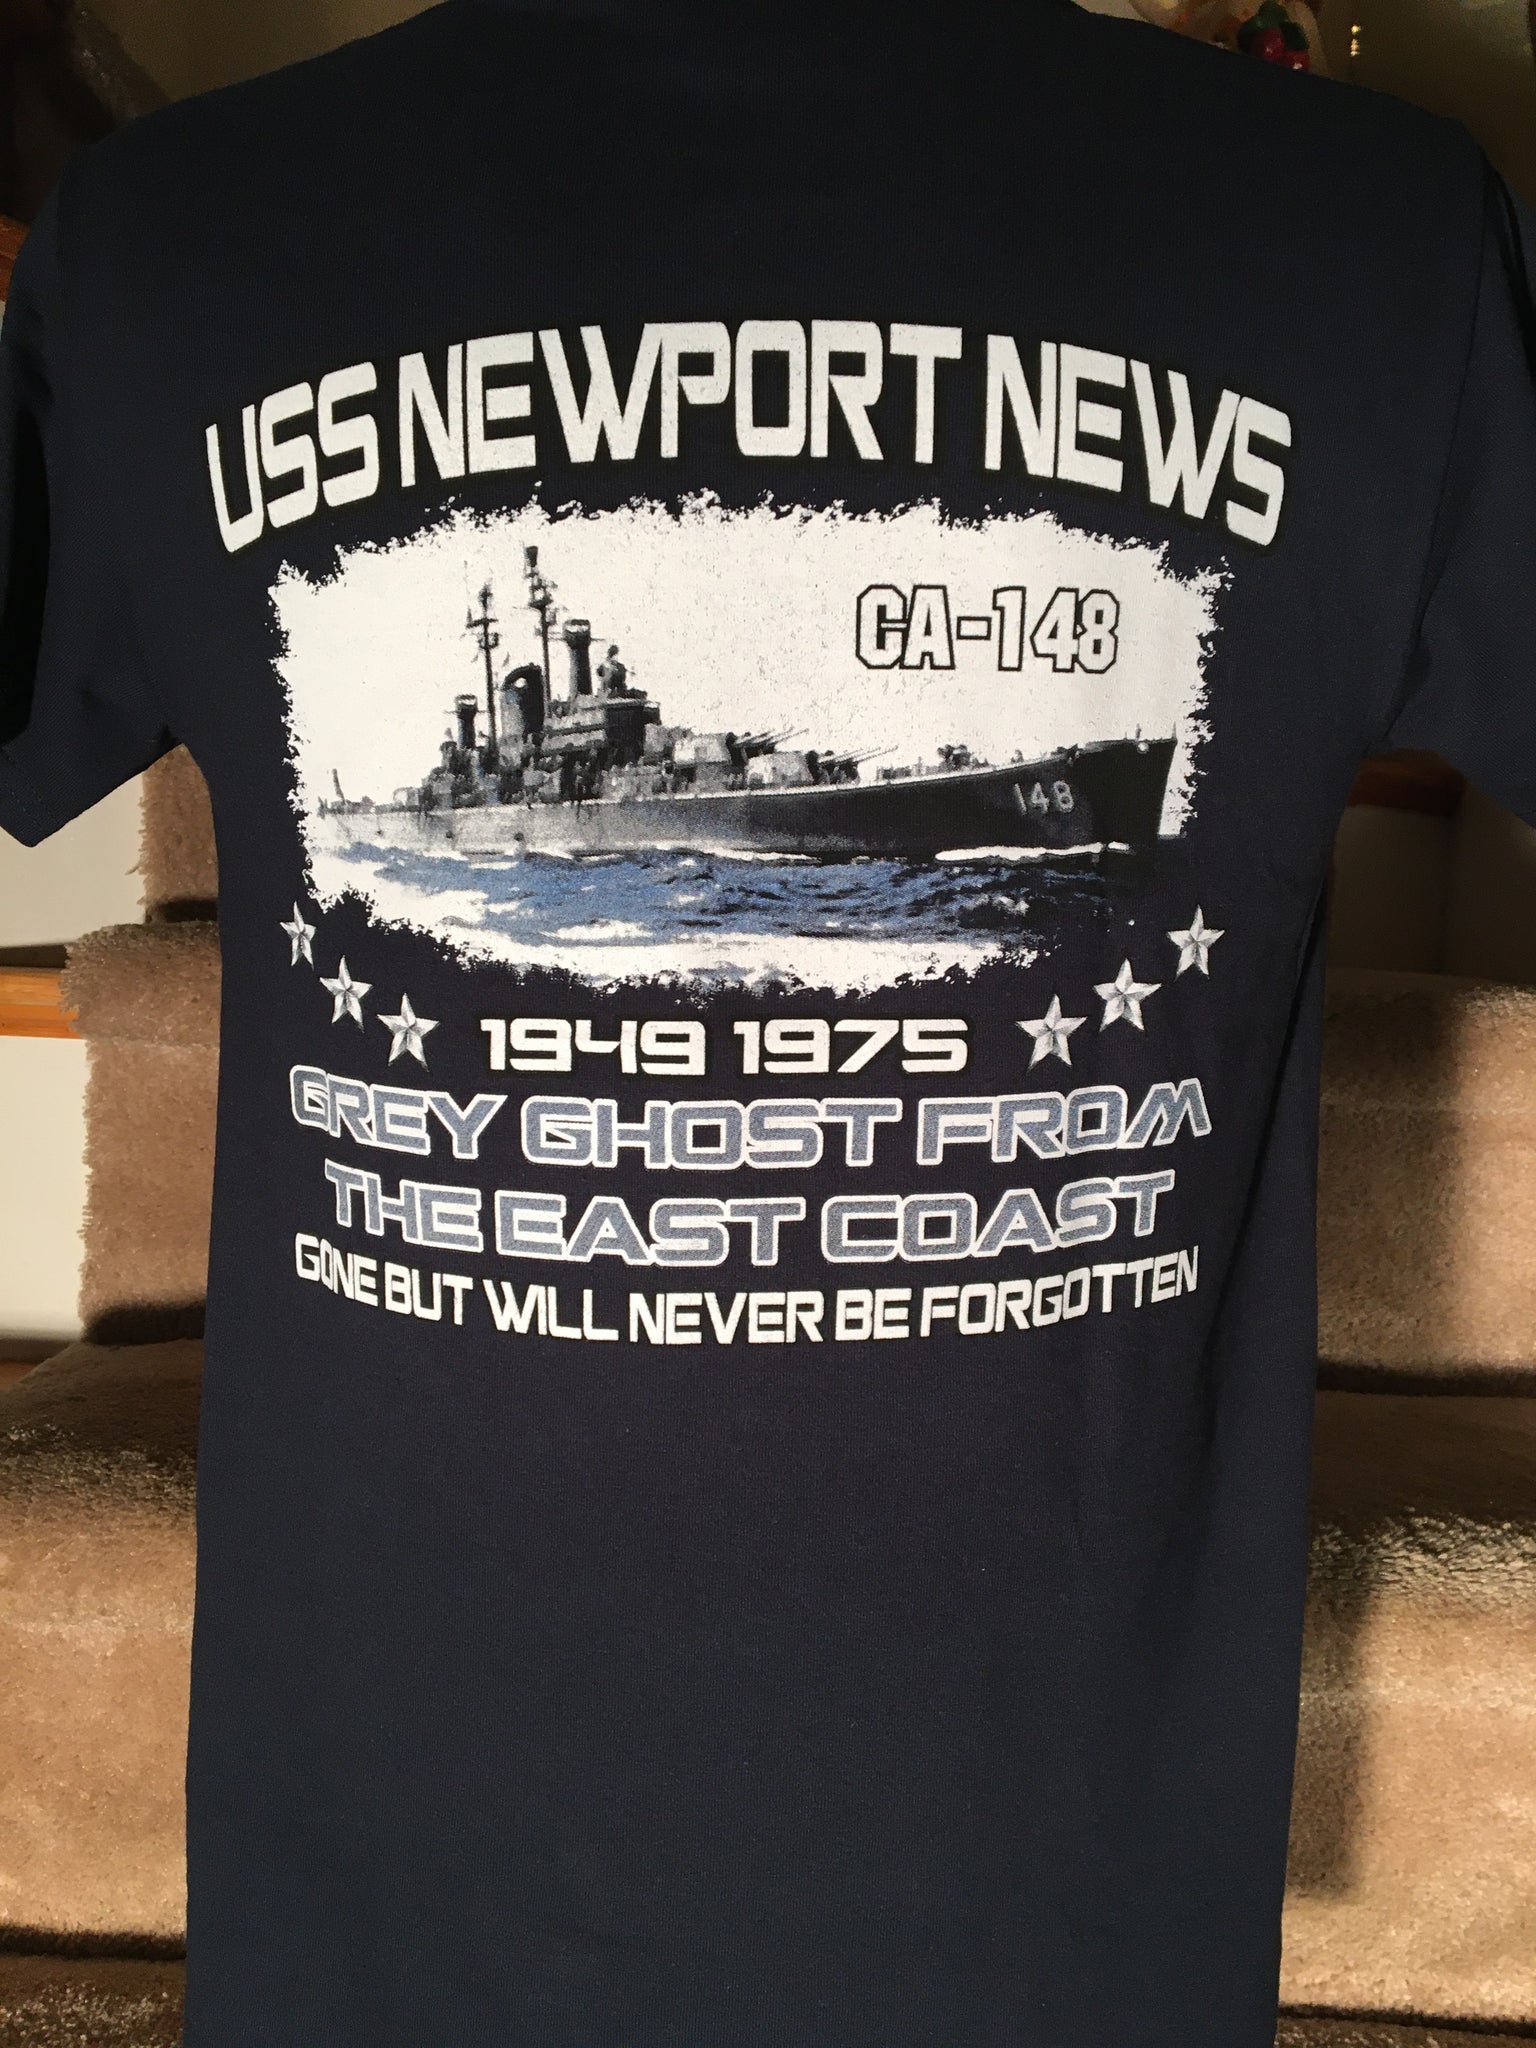 #19 "GREY GHOST FROM THE EAST COAST"-NAVY Tee Shirt